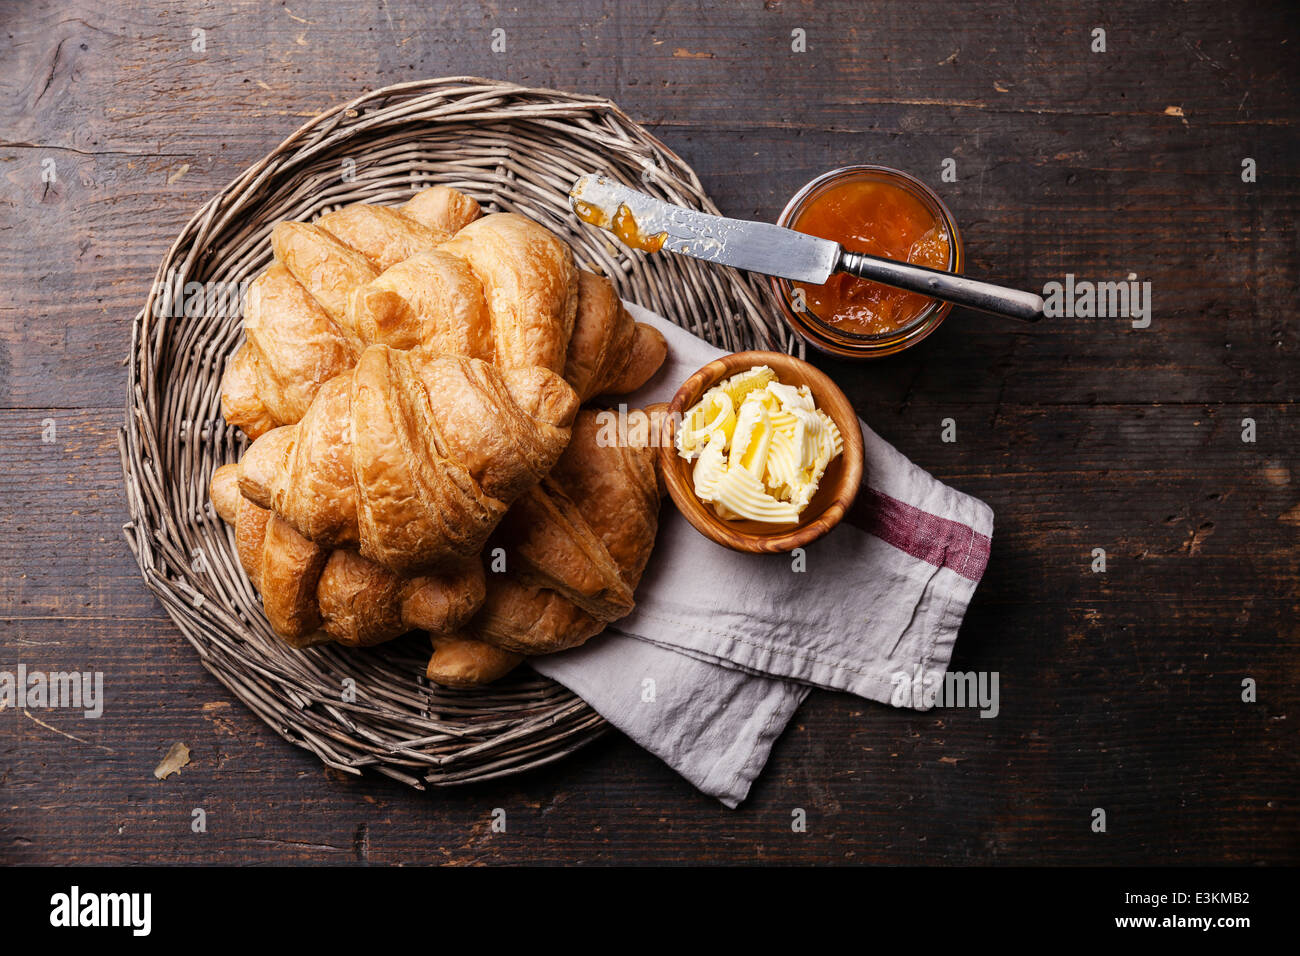 Croissants with butter and jam in wicker tray on dark wooden background Stock Photo